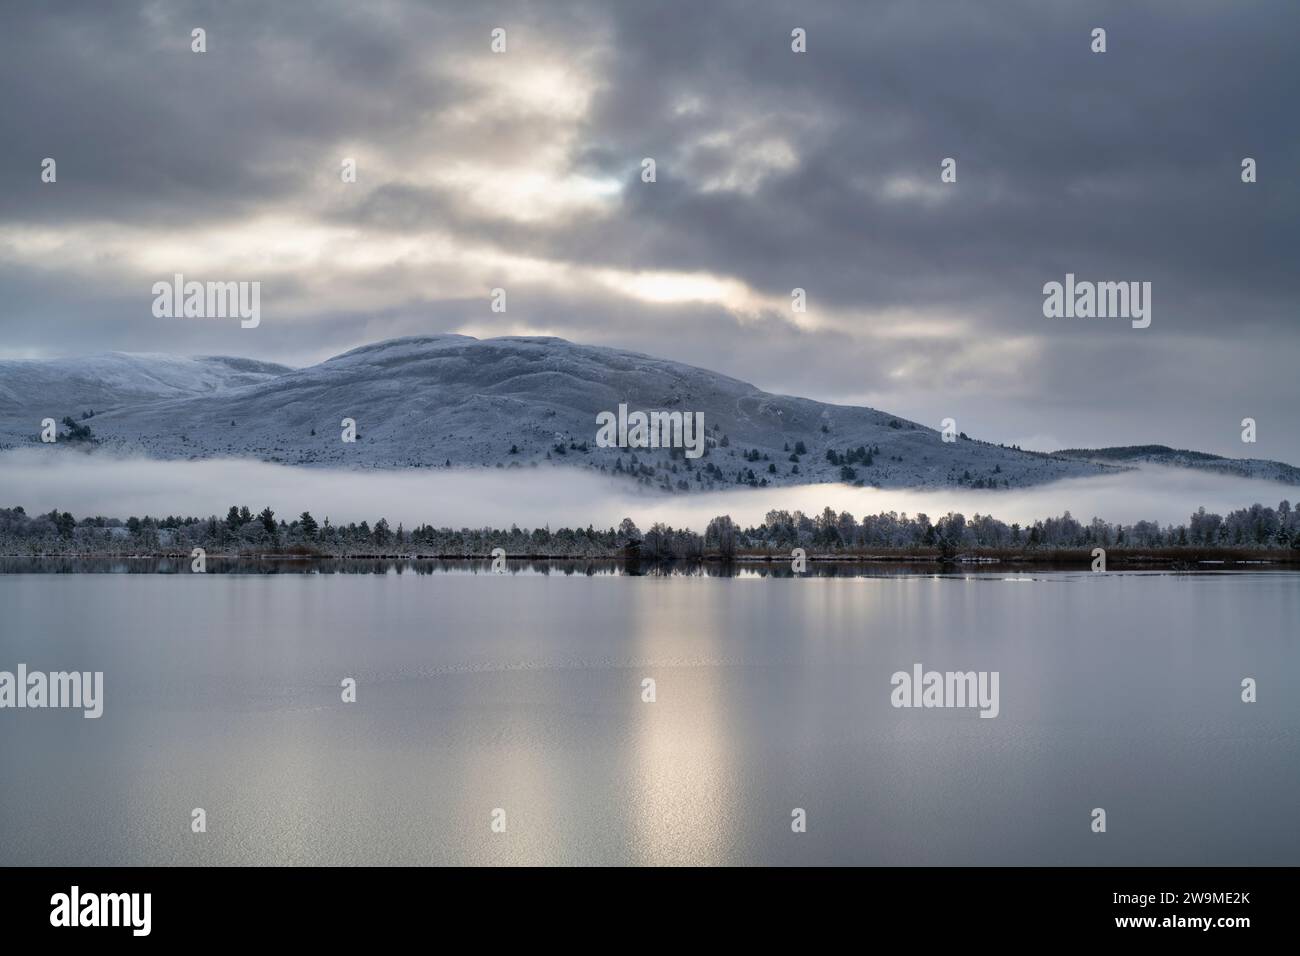 Loch Mallachie in the snow, mist and ice, Highlands, Scotland Stock Photo